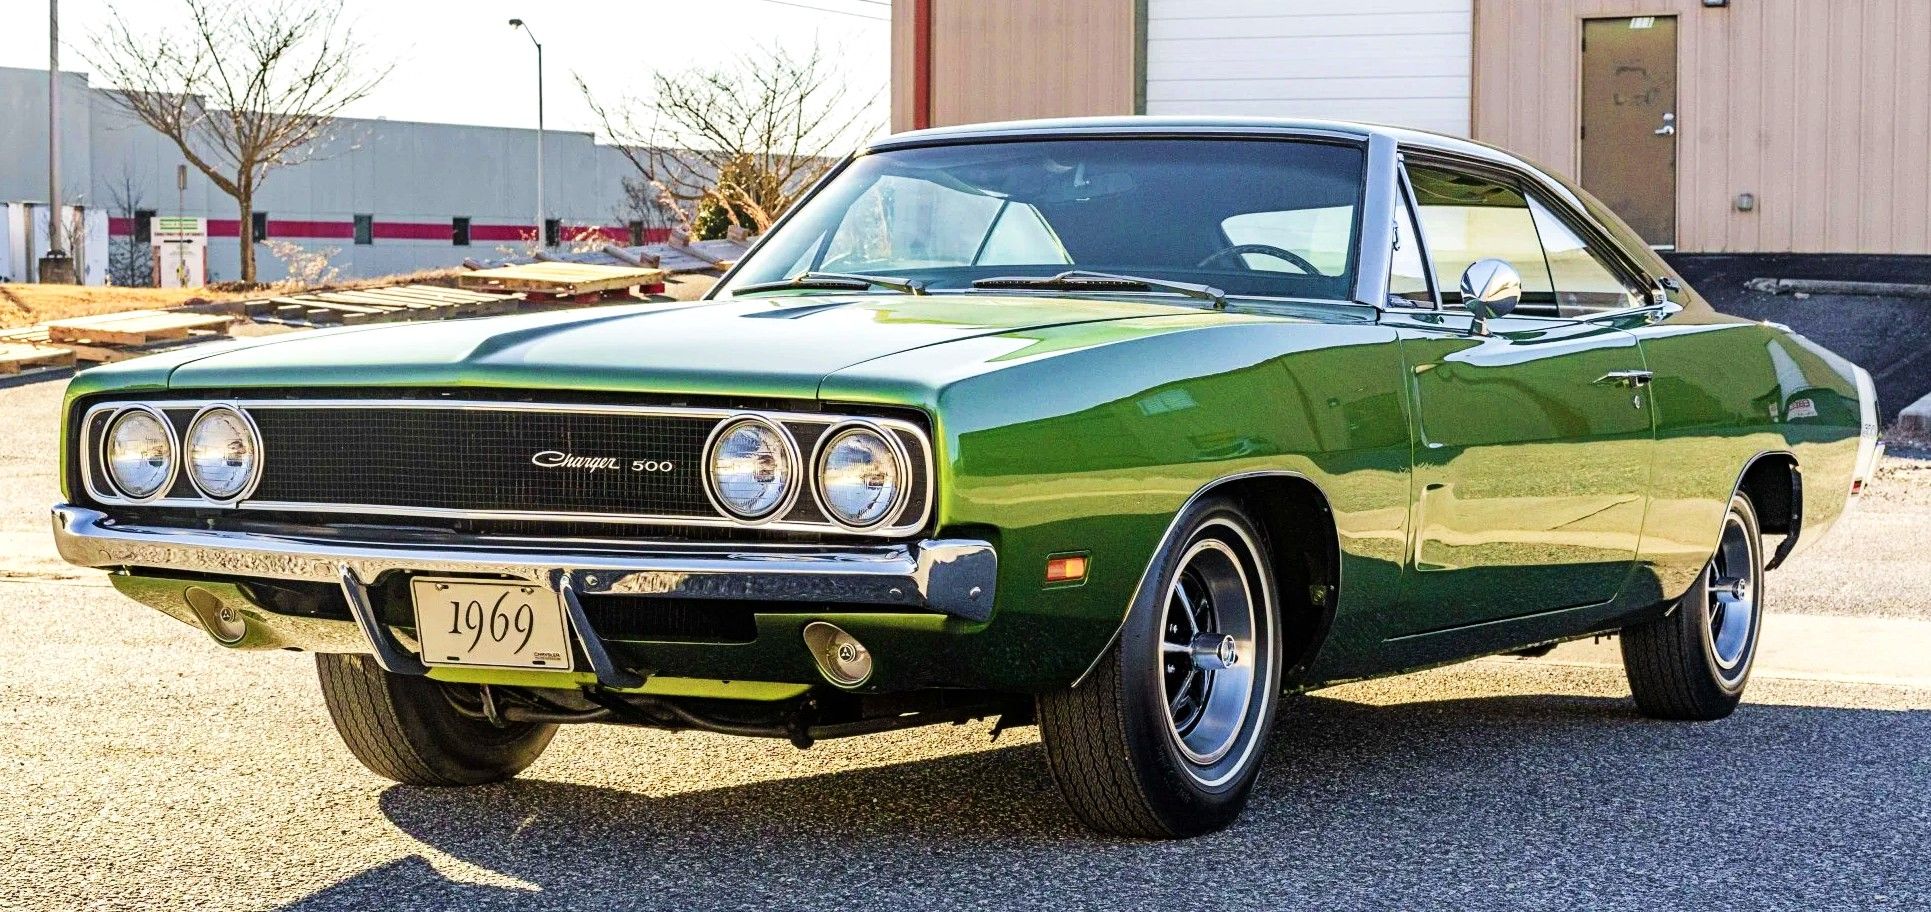 1969 Dodge Charger front angle